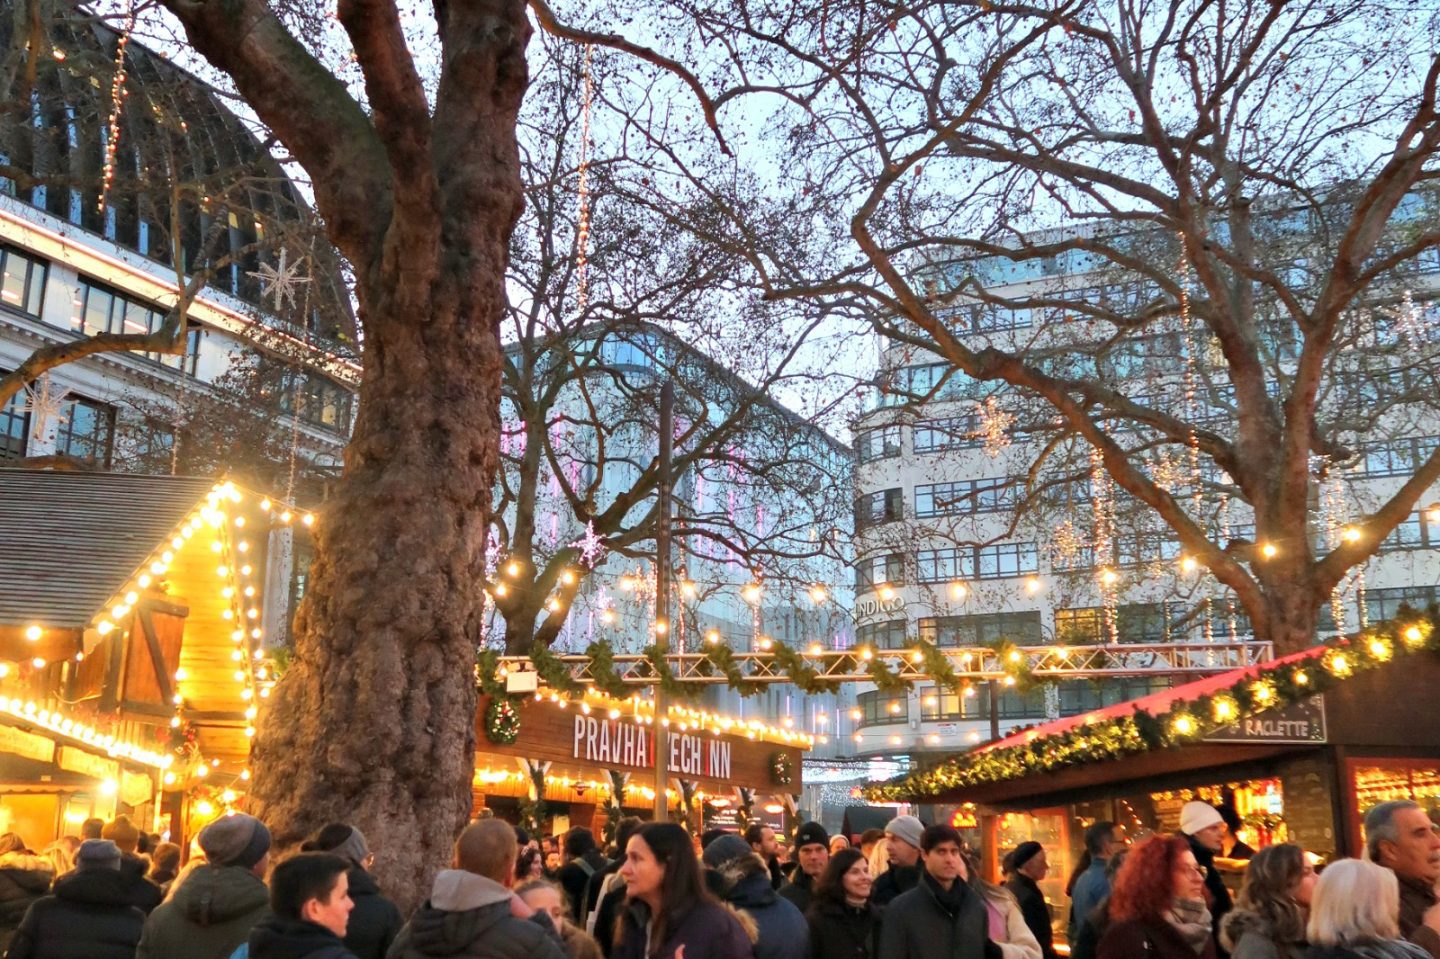 Leicester Square Christmas market 